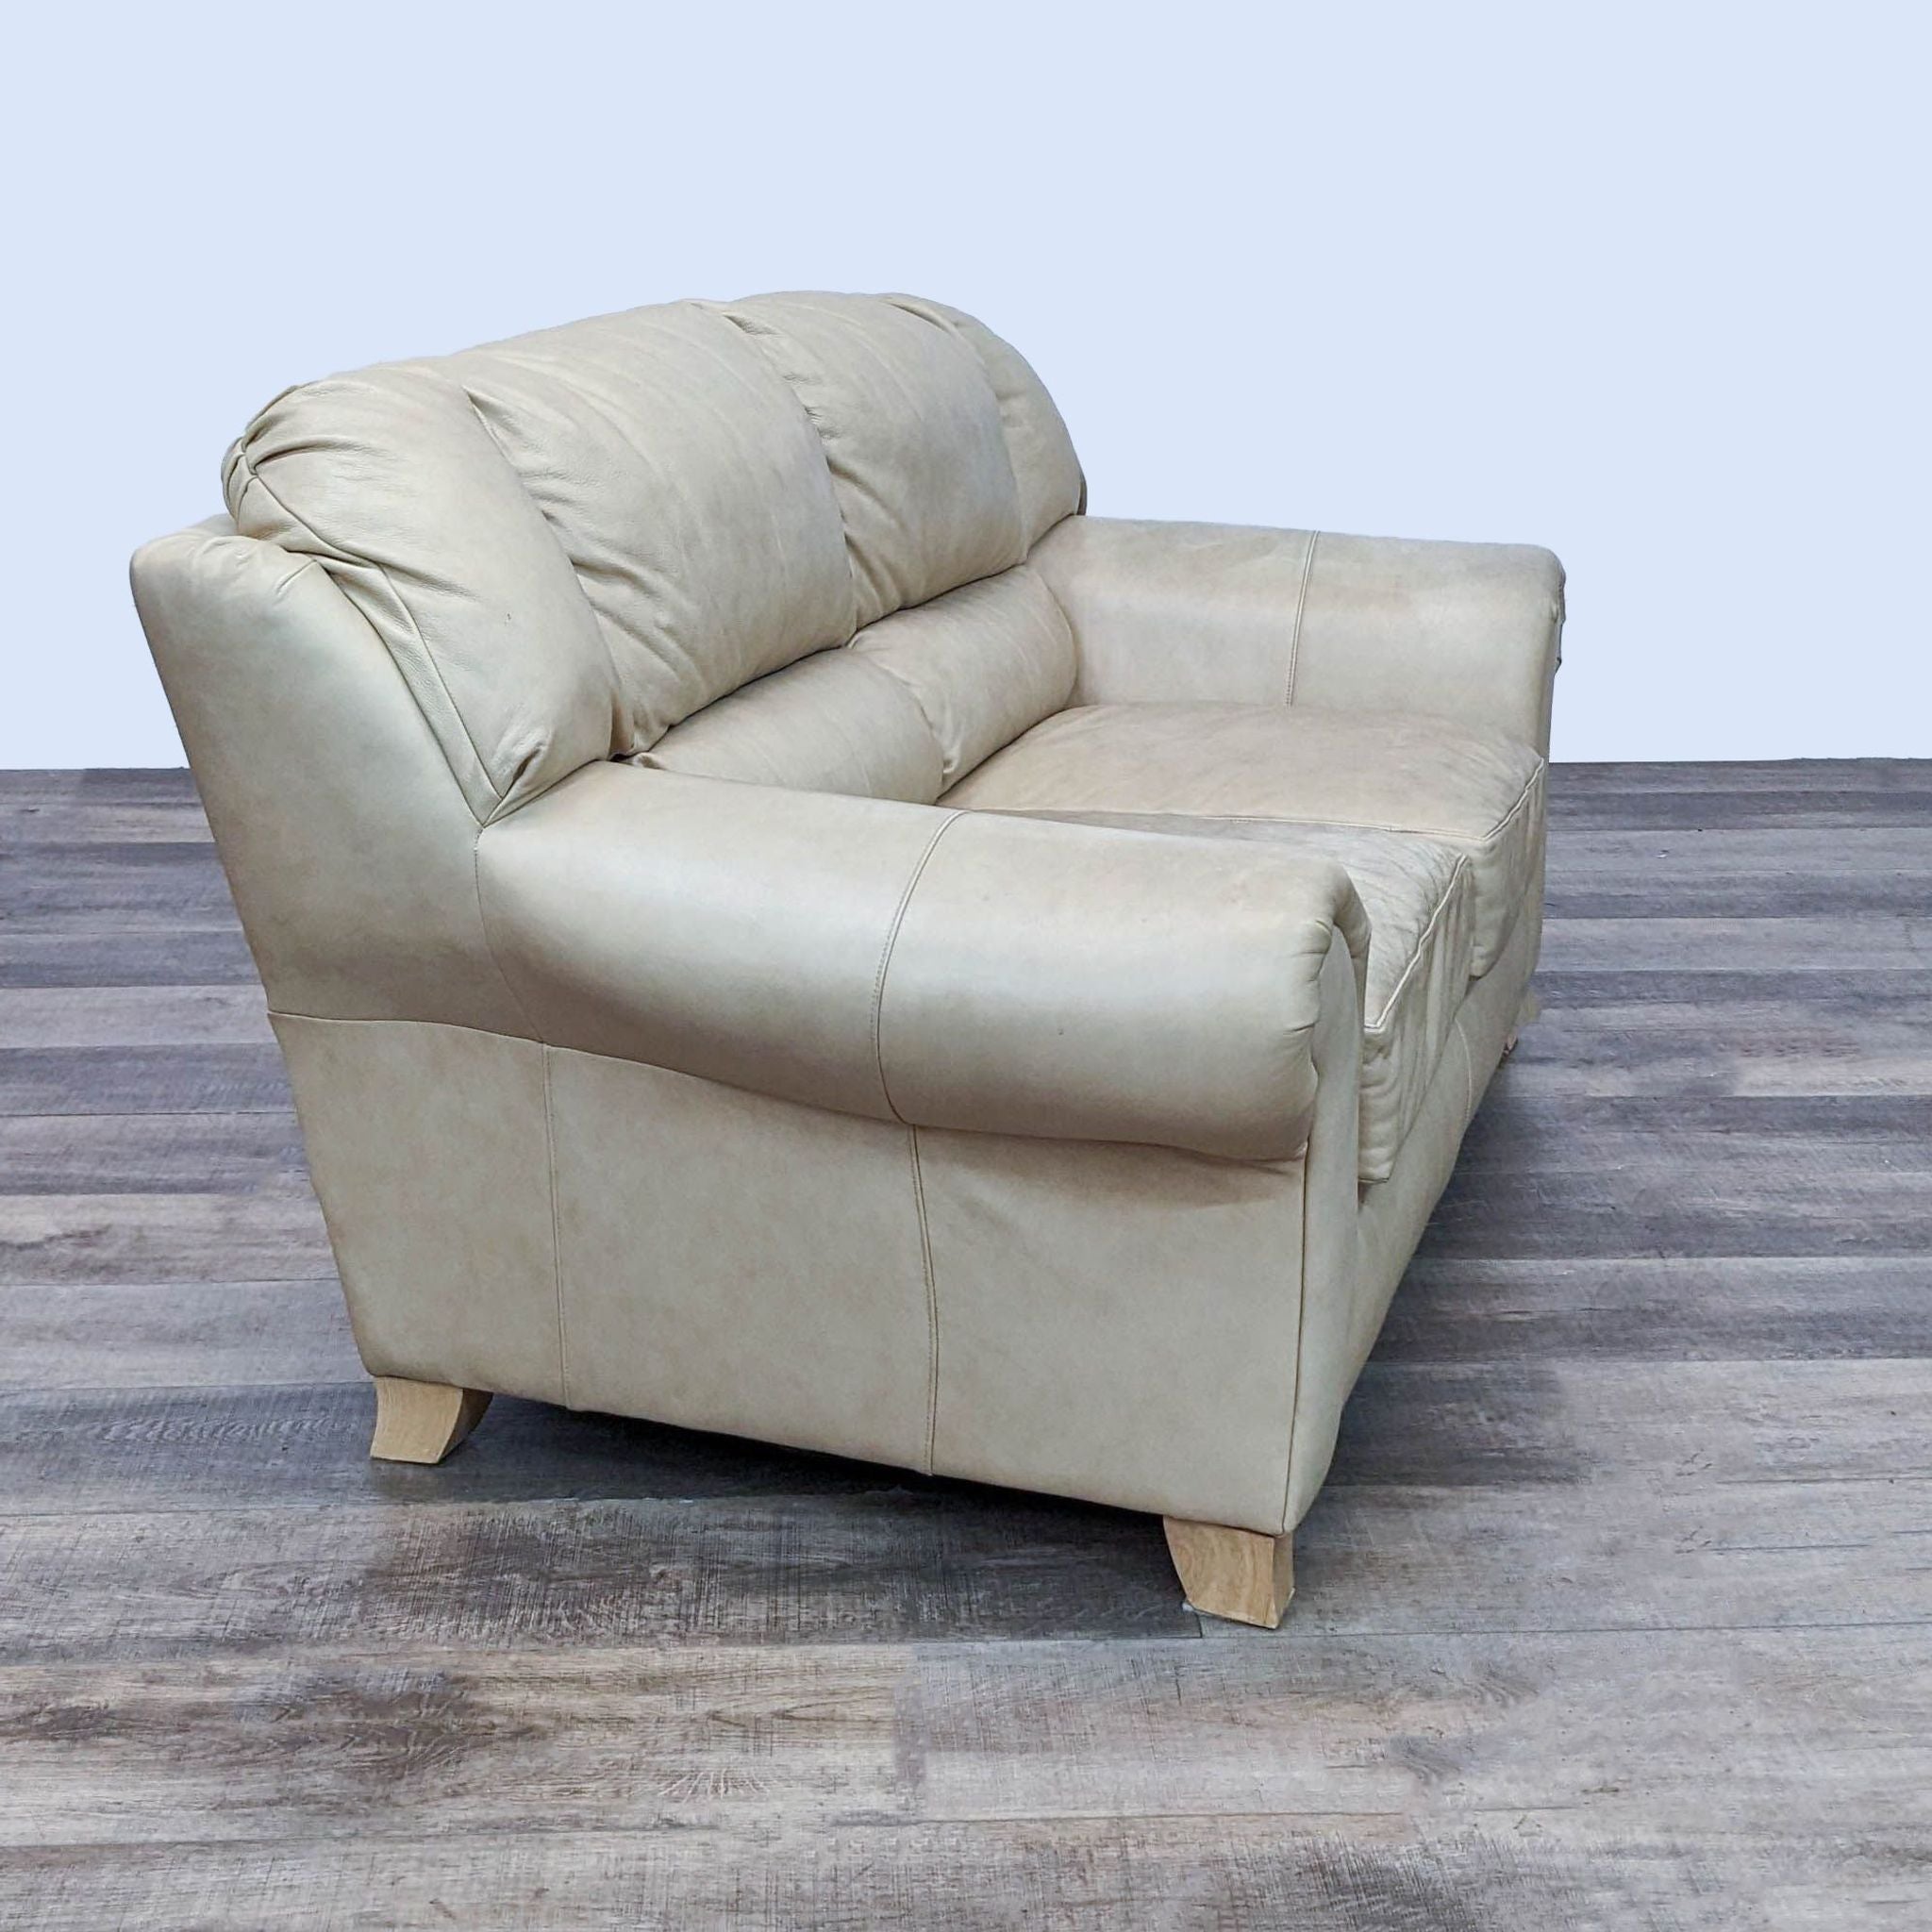 Reperch tan leather loveseat showcasing high back and side, featuring lumbar support and light finish wooden feet, angled view.